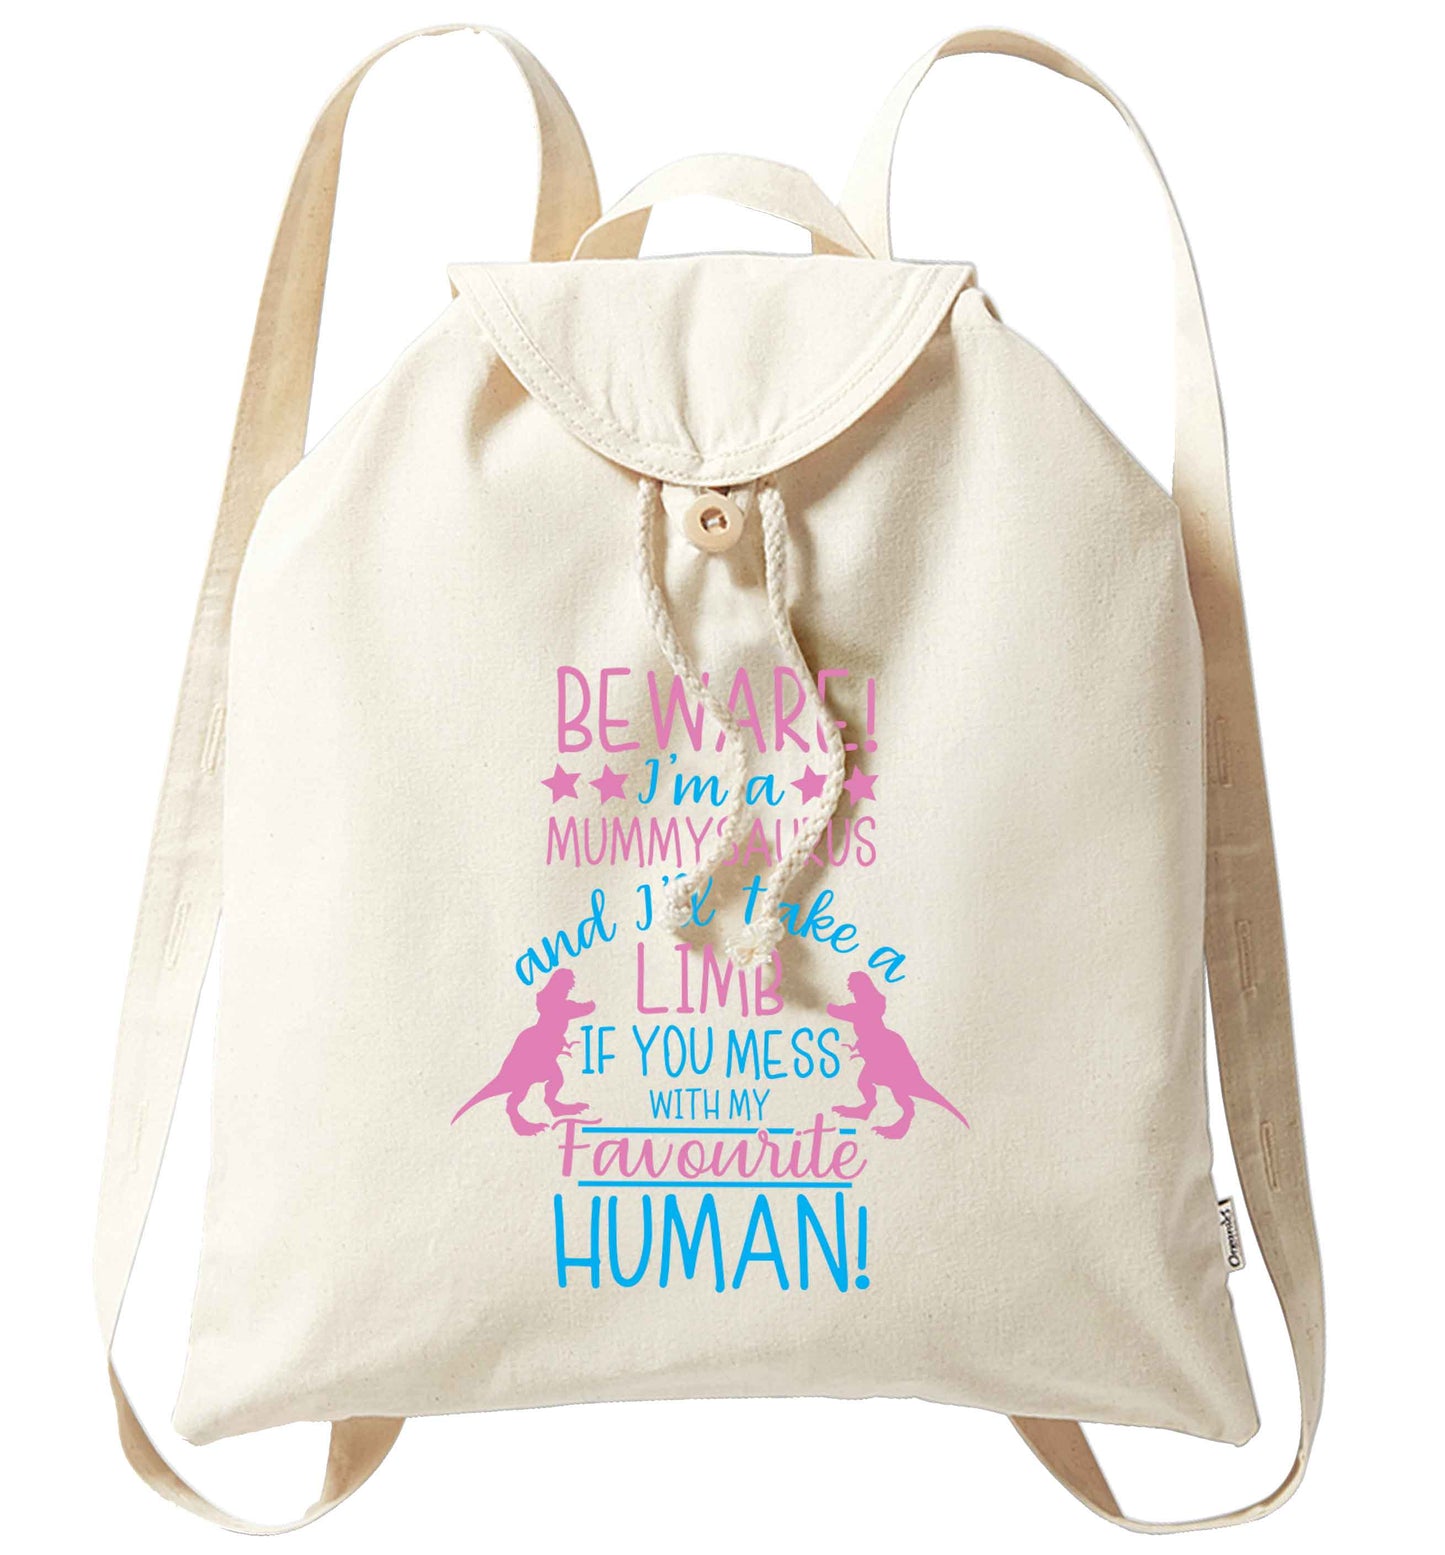 Perfect gift for any protective mummysaurus! Beware I'm a mummysaurus and I'll take a limb if you mess with my favourite human organic cotton backpack tote with wooden buttons in natural